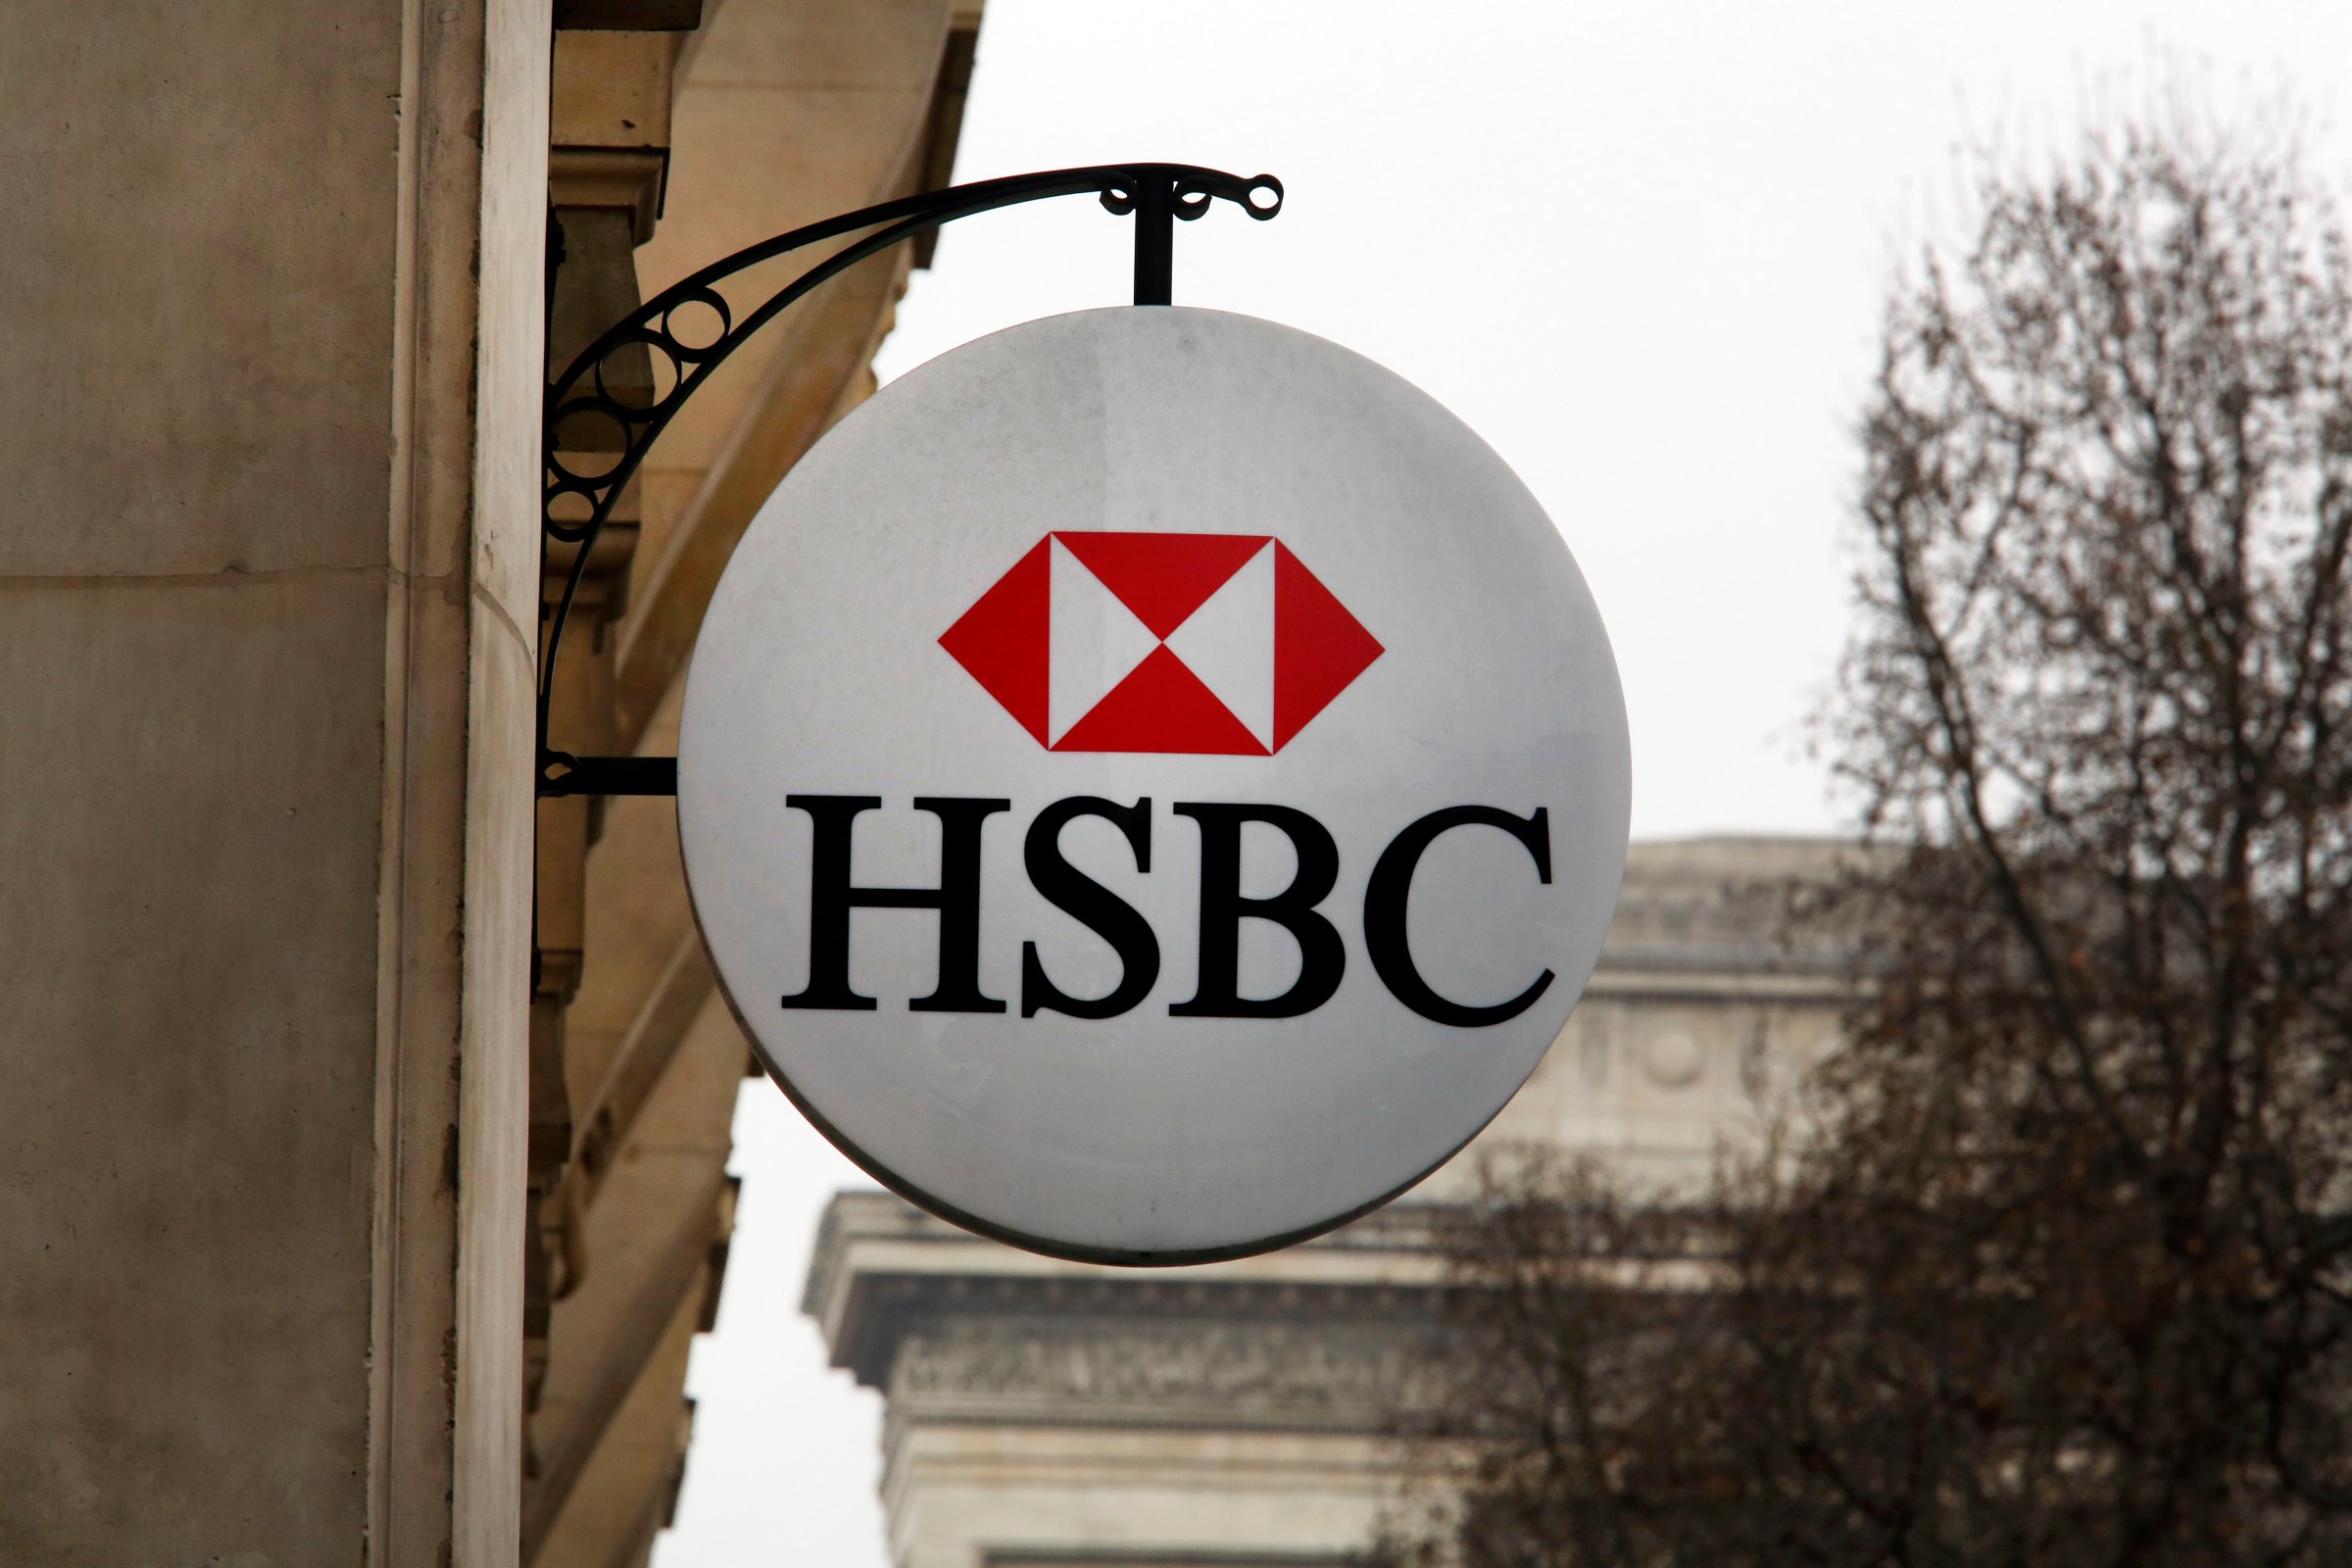 The HSBC logo on the facade of HSBC France headquarters in Paris on Feb. 9, 2015.